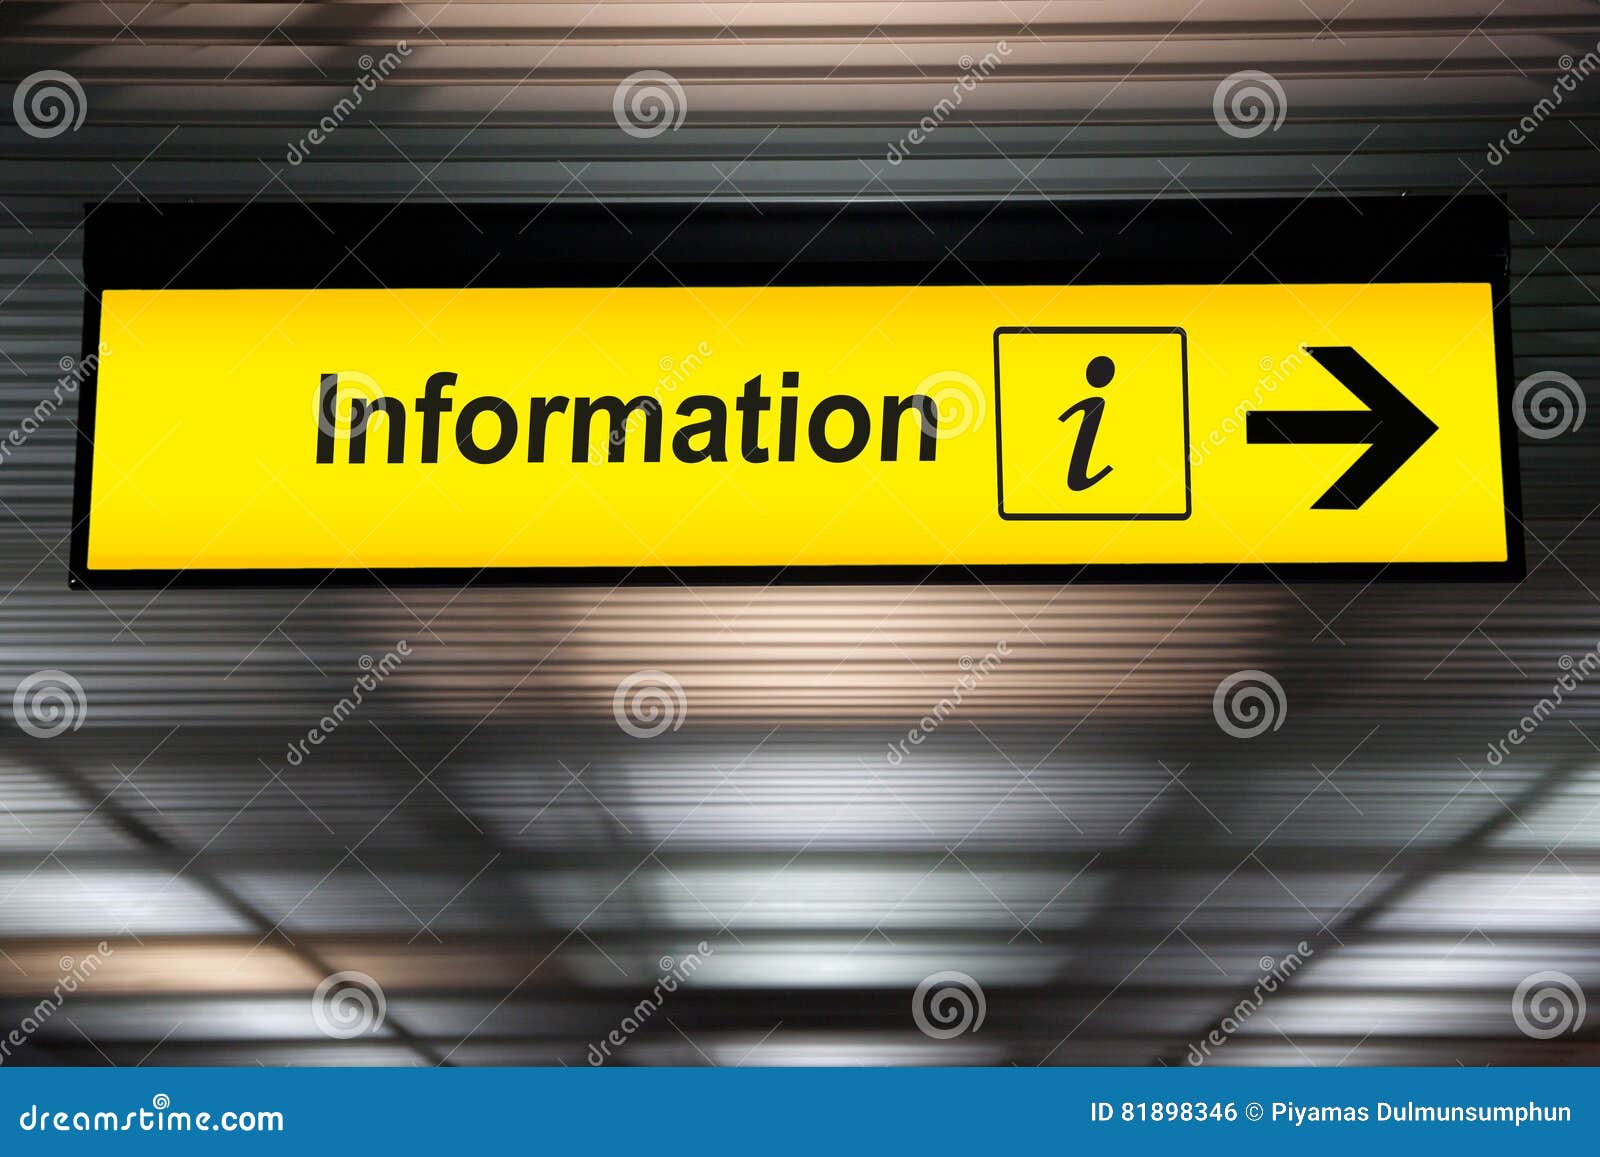 Help Desk Information Sign At Airport For Tourist Stock Photo